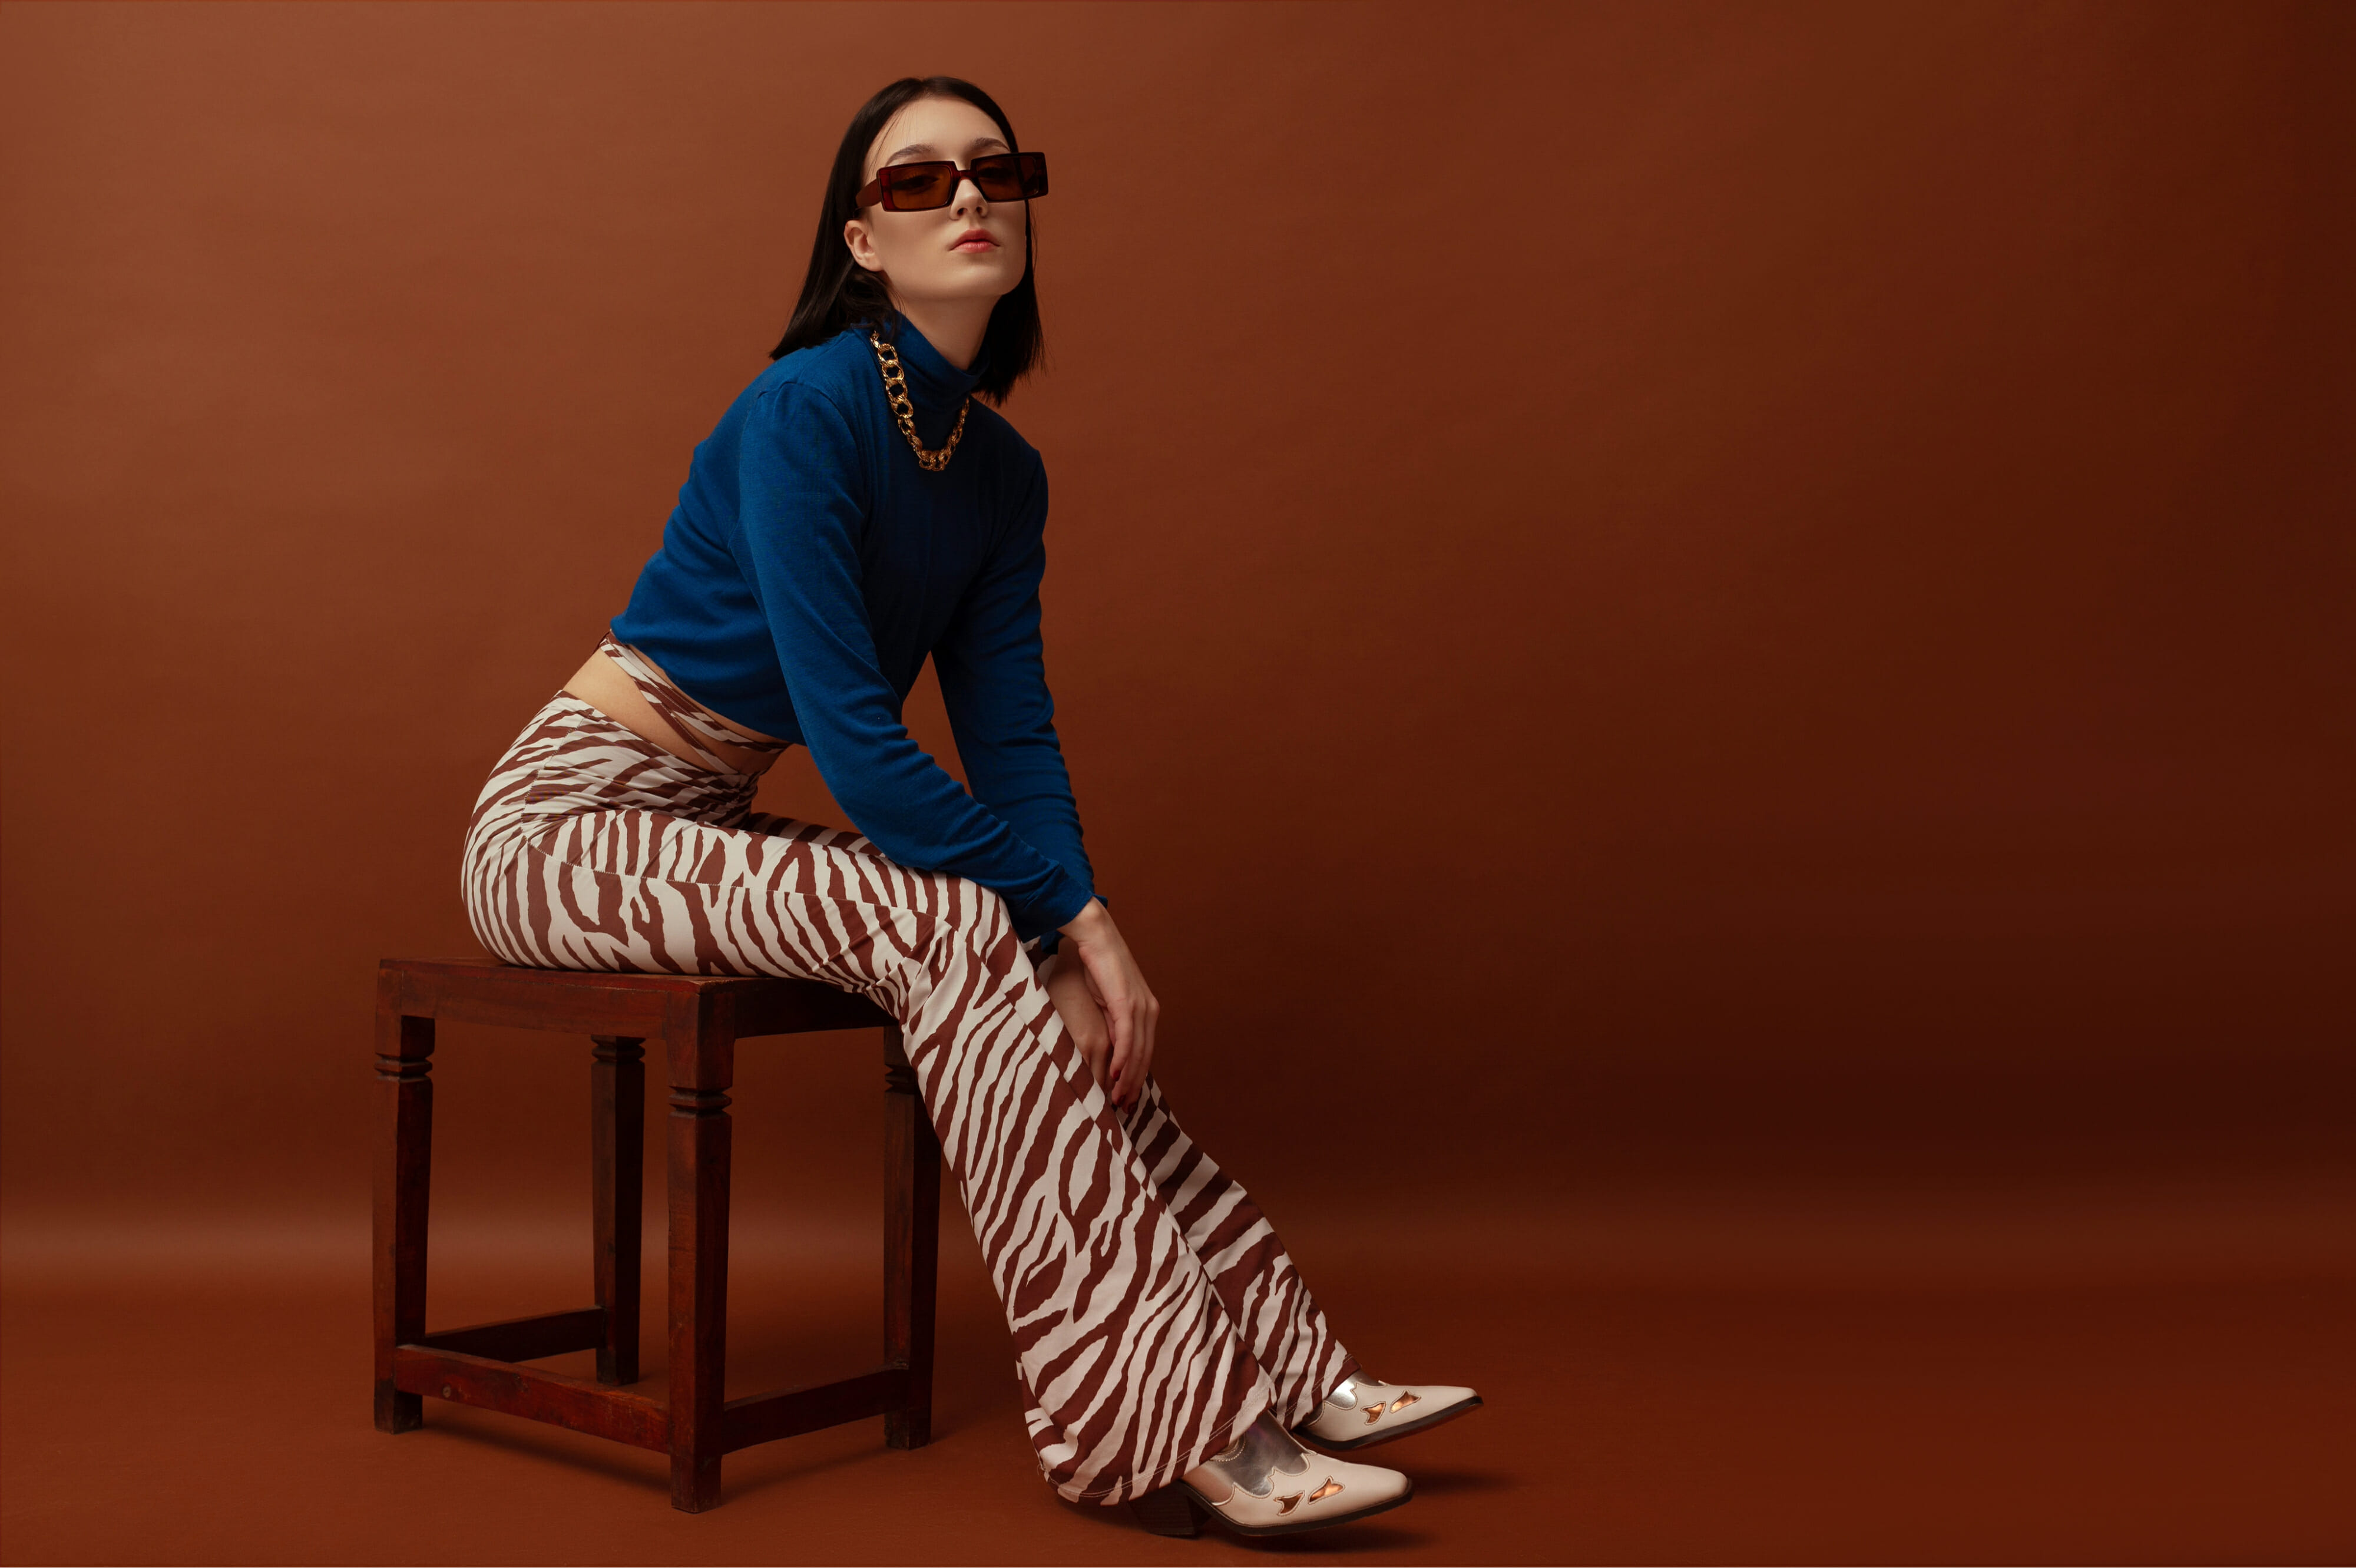 Fashionable woman wearing trendy brown rectangular sunglasses, stylish blue turtleneck, flared trousers with zebra print, and boots